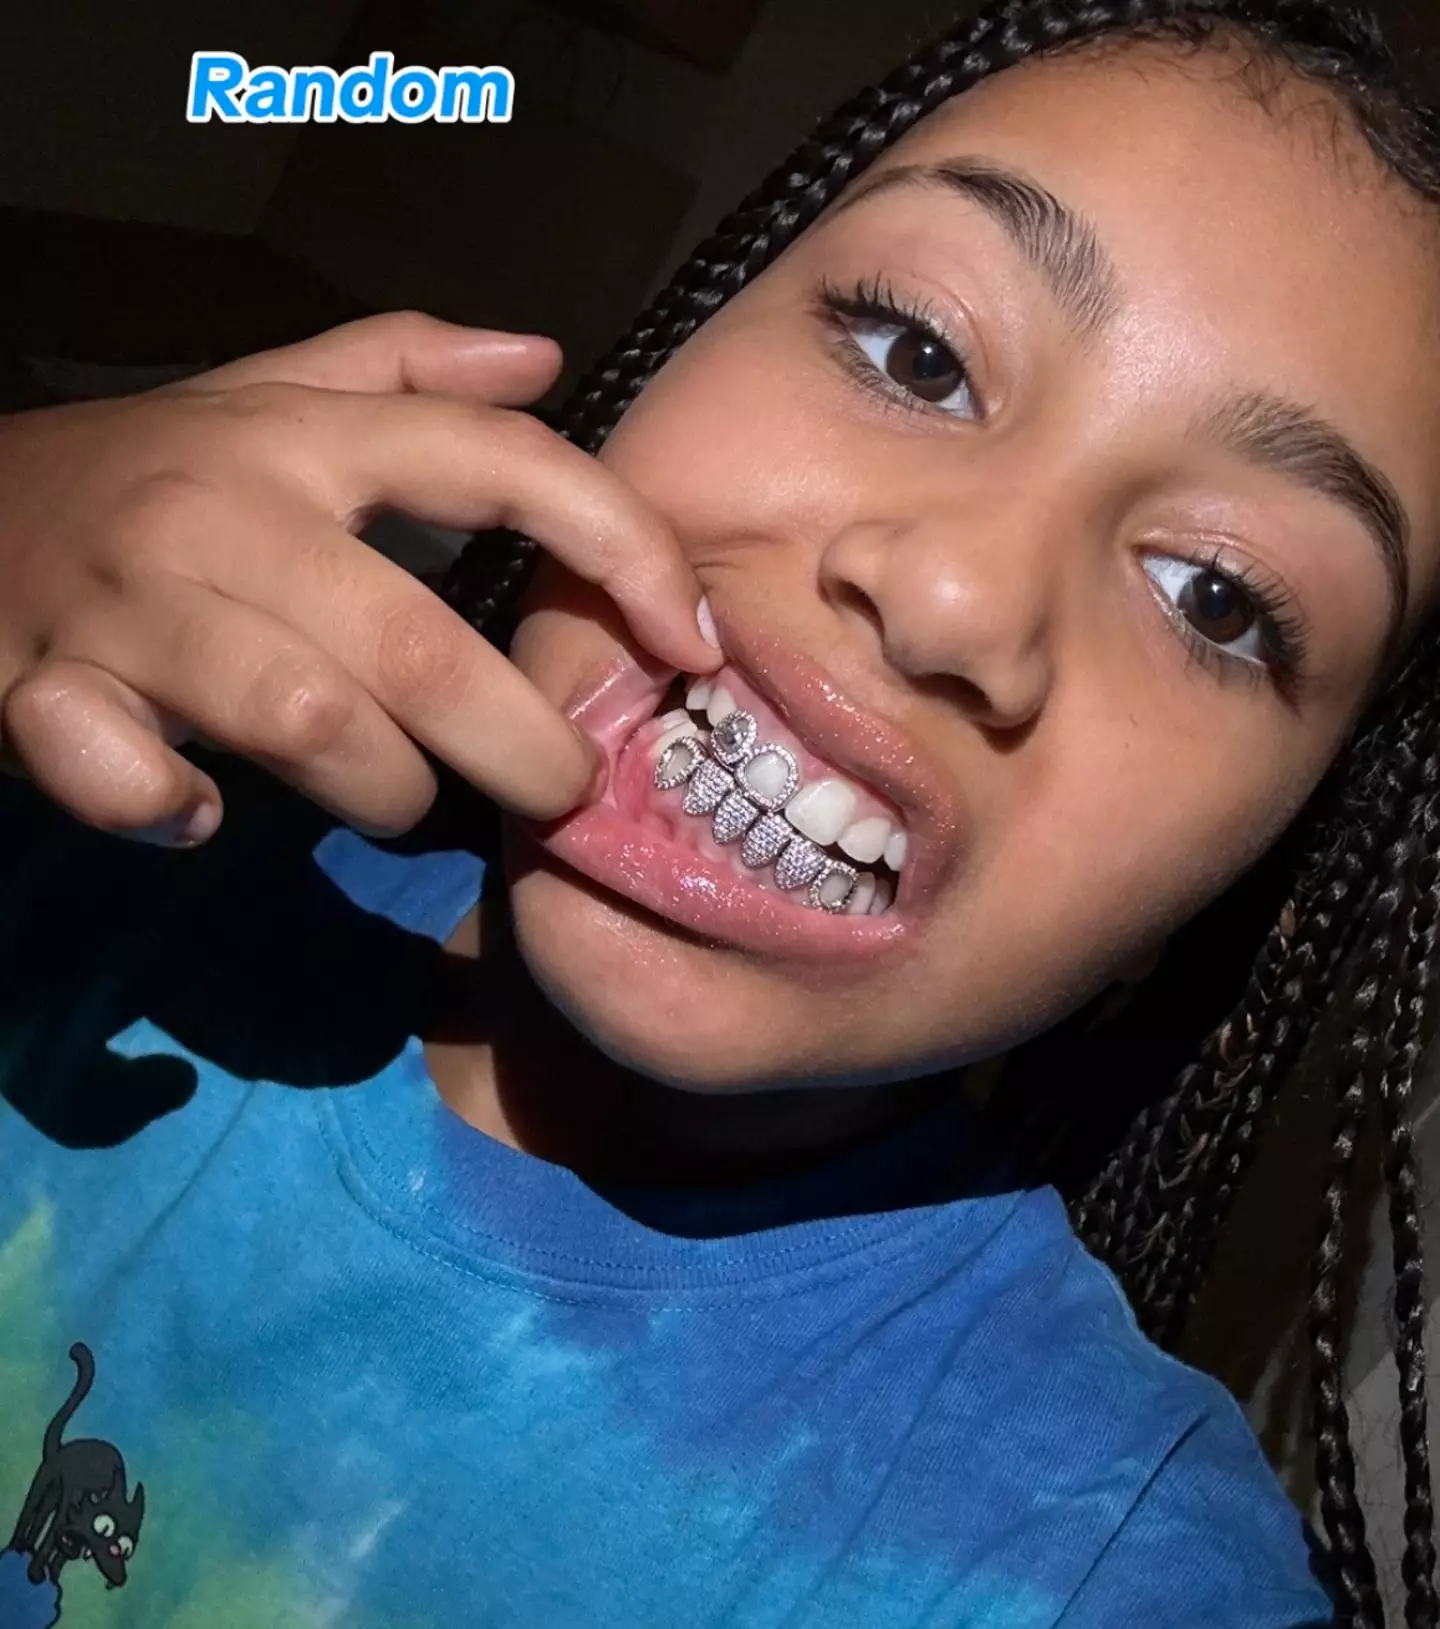 North recently showed off her dental jewelry.